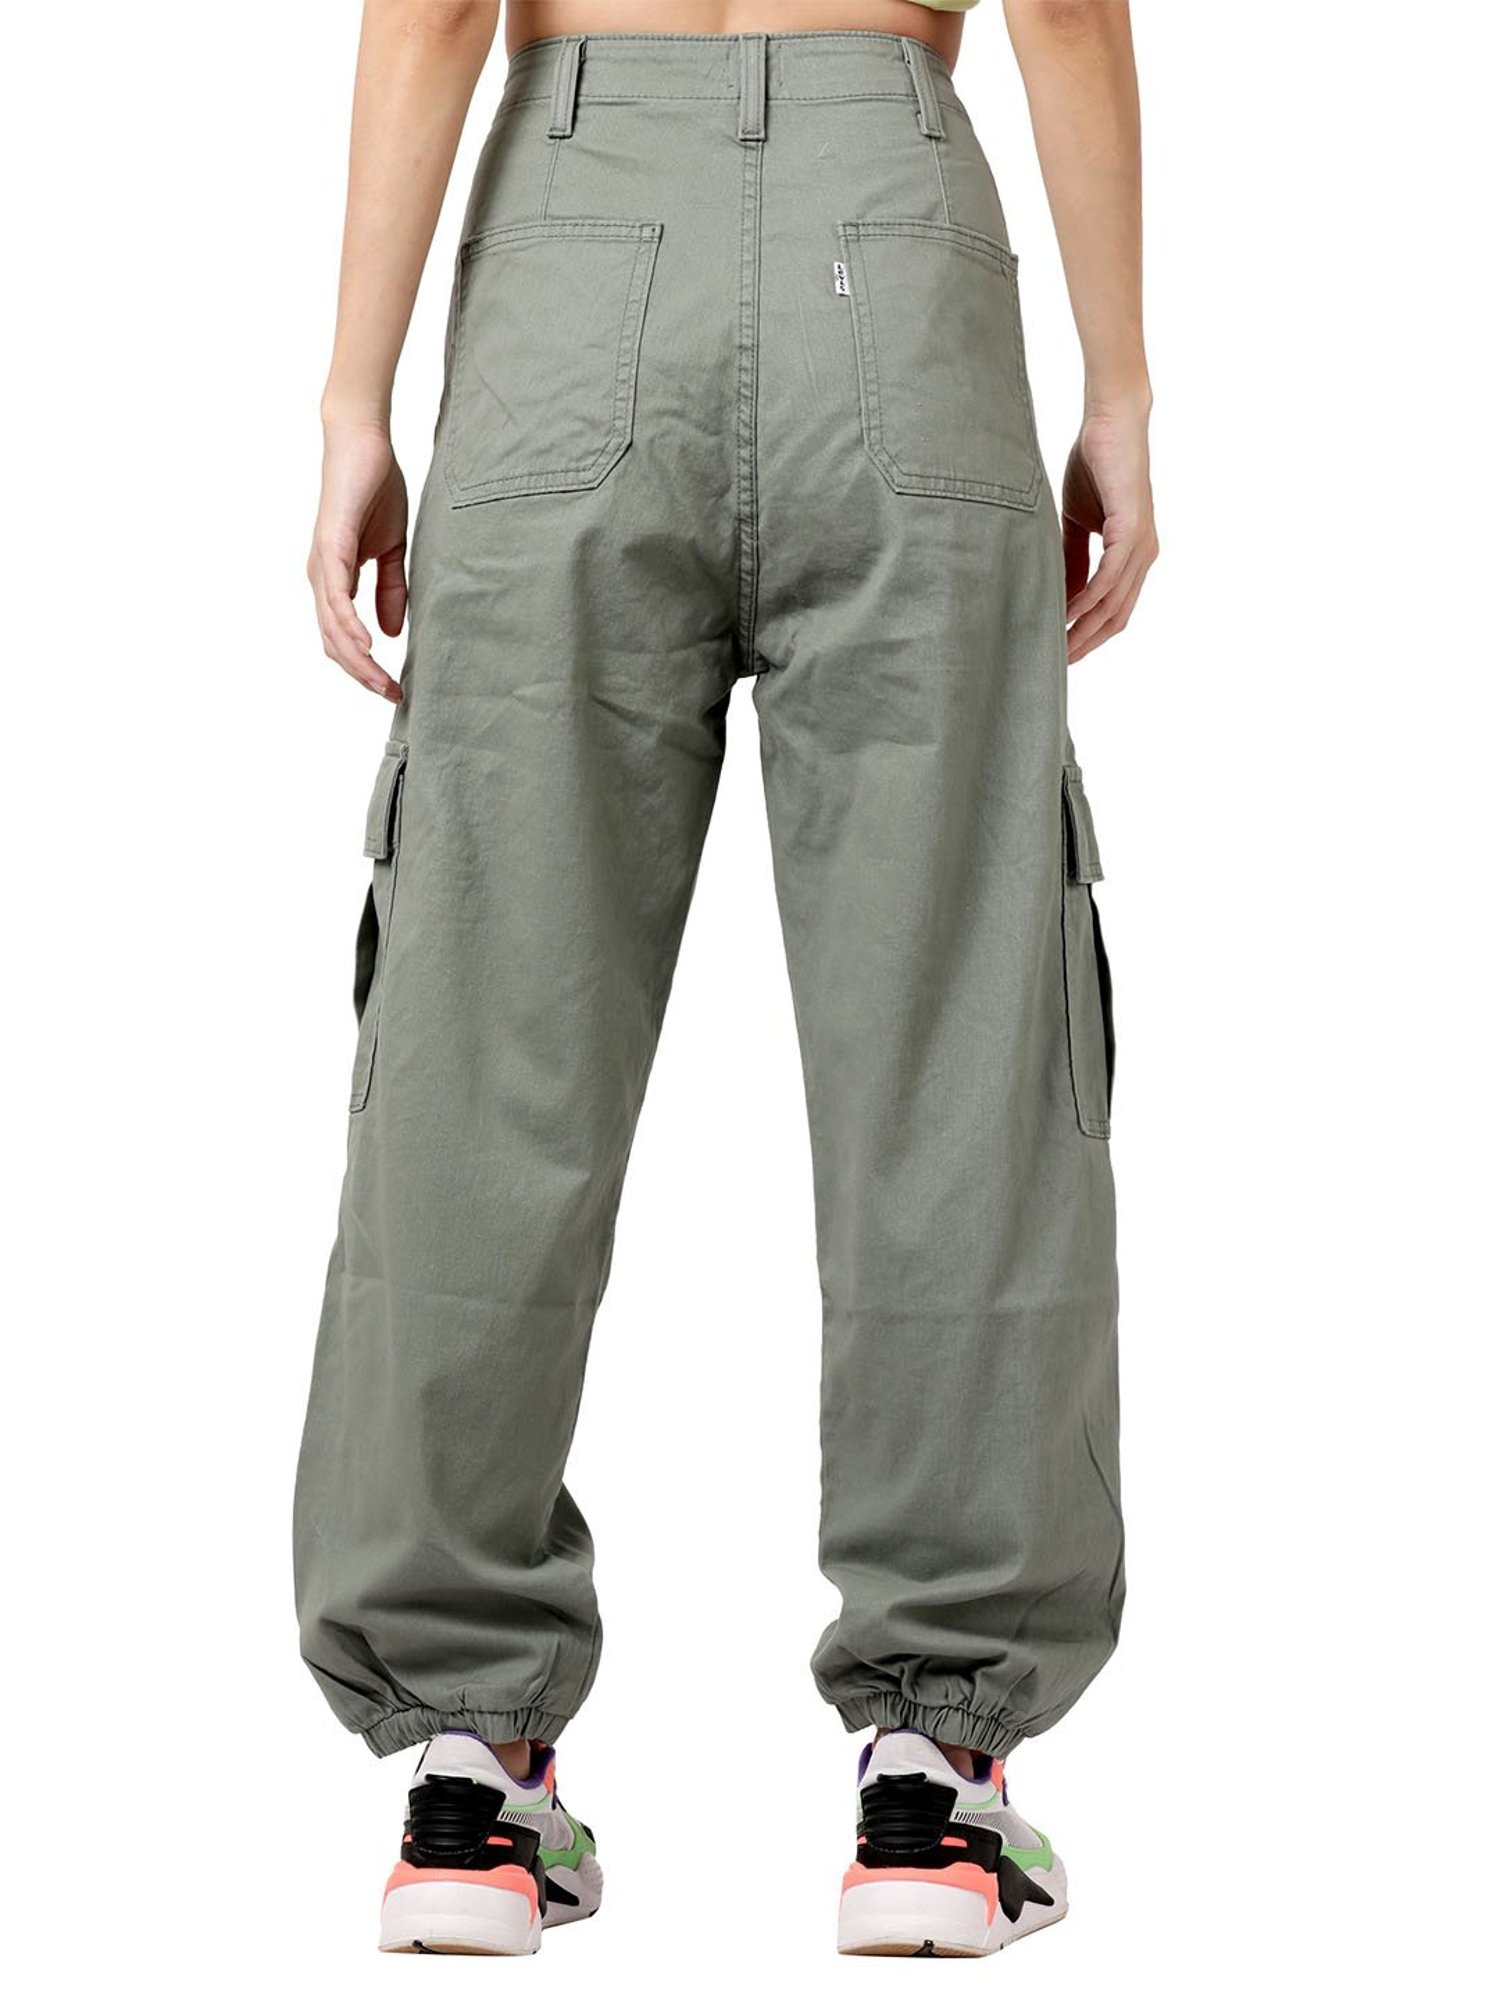 Buy Levis Mens XX Chino Taper Cargo Pants Levis Official Online Store  PH